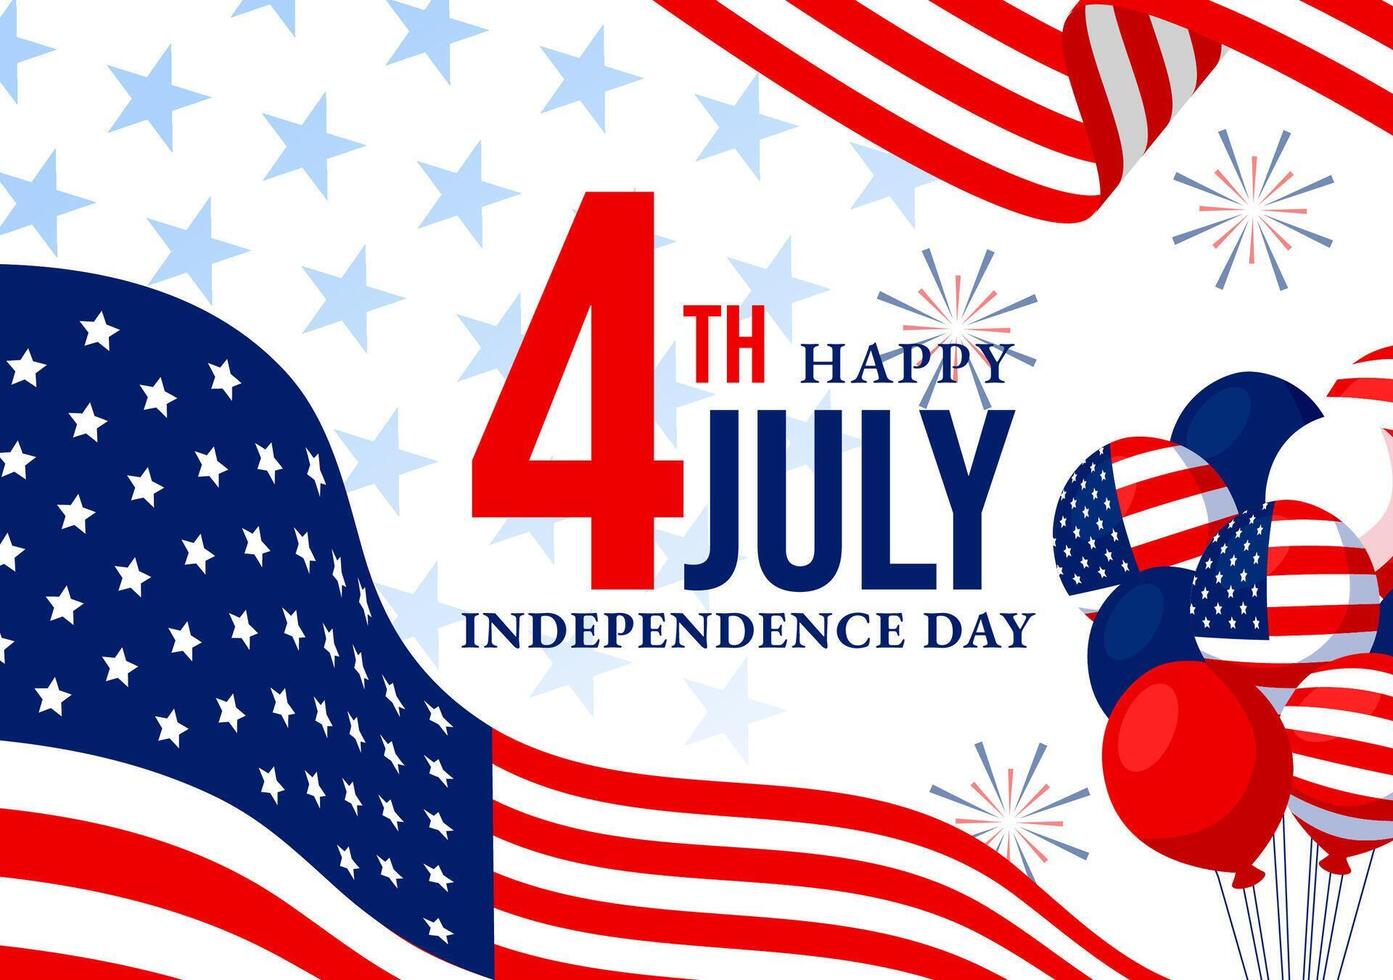 4th of July Happy Independence Day USA Illustration with American Flag and Balloons in Flat National Holiday Cartoon Background Design vector